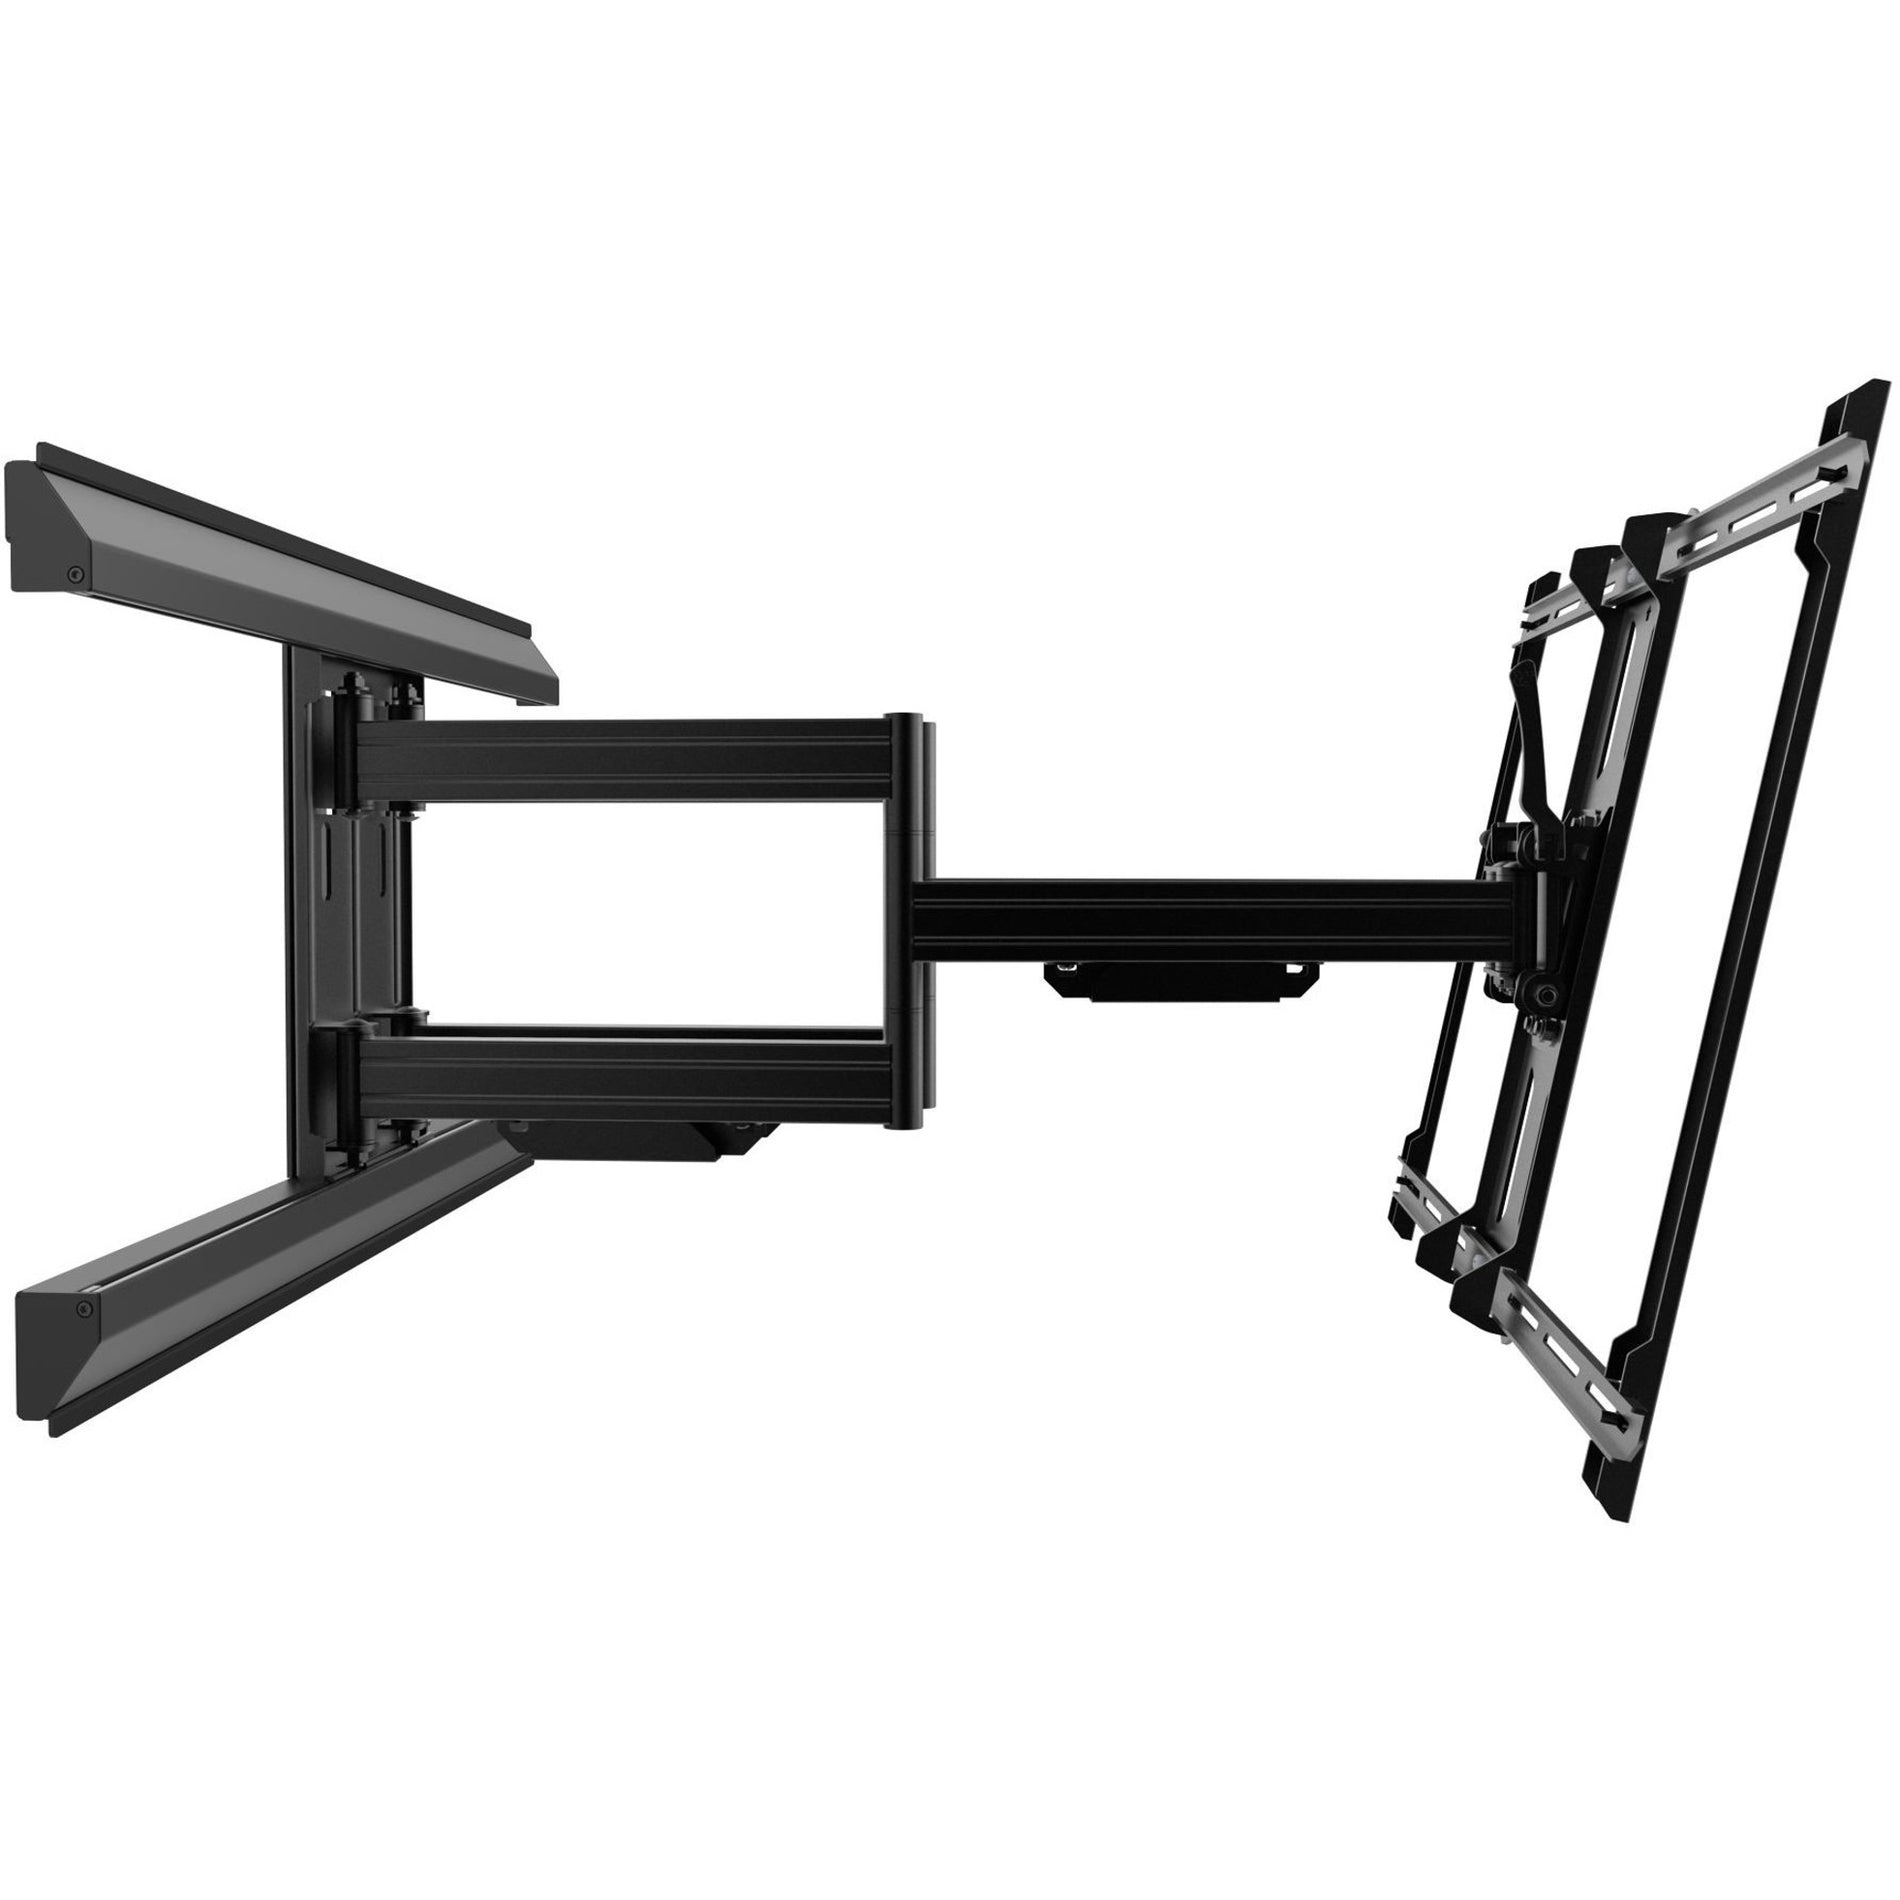 Kanto PMX700 Pro Series Full Motion TV Wall Mount for 42-inch to 100-inch TVs, Retractable, Swivel, Tilt, Full Motion, Articulating, Cable Management, Extendable